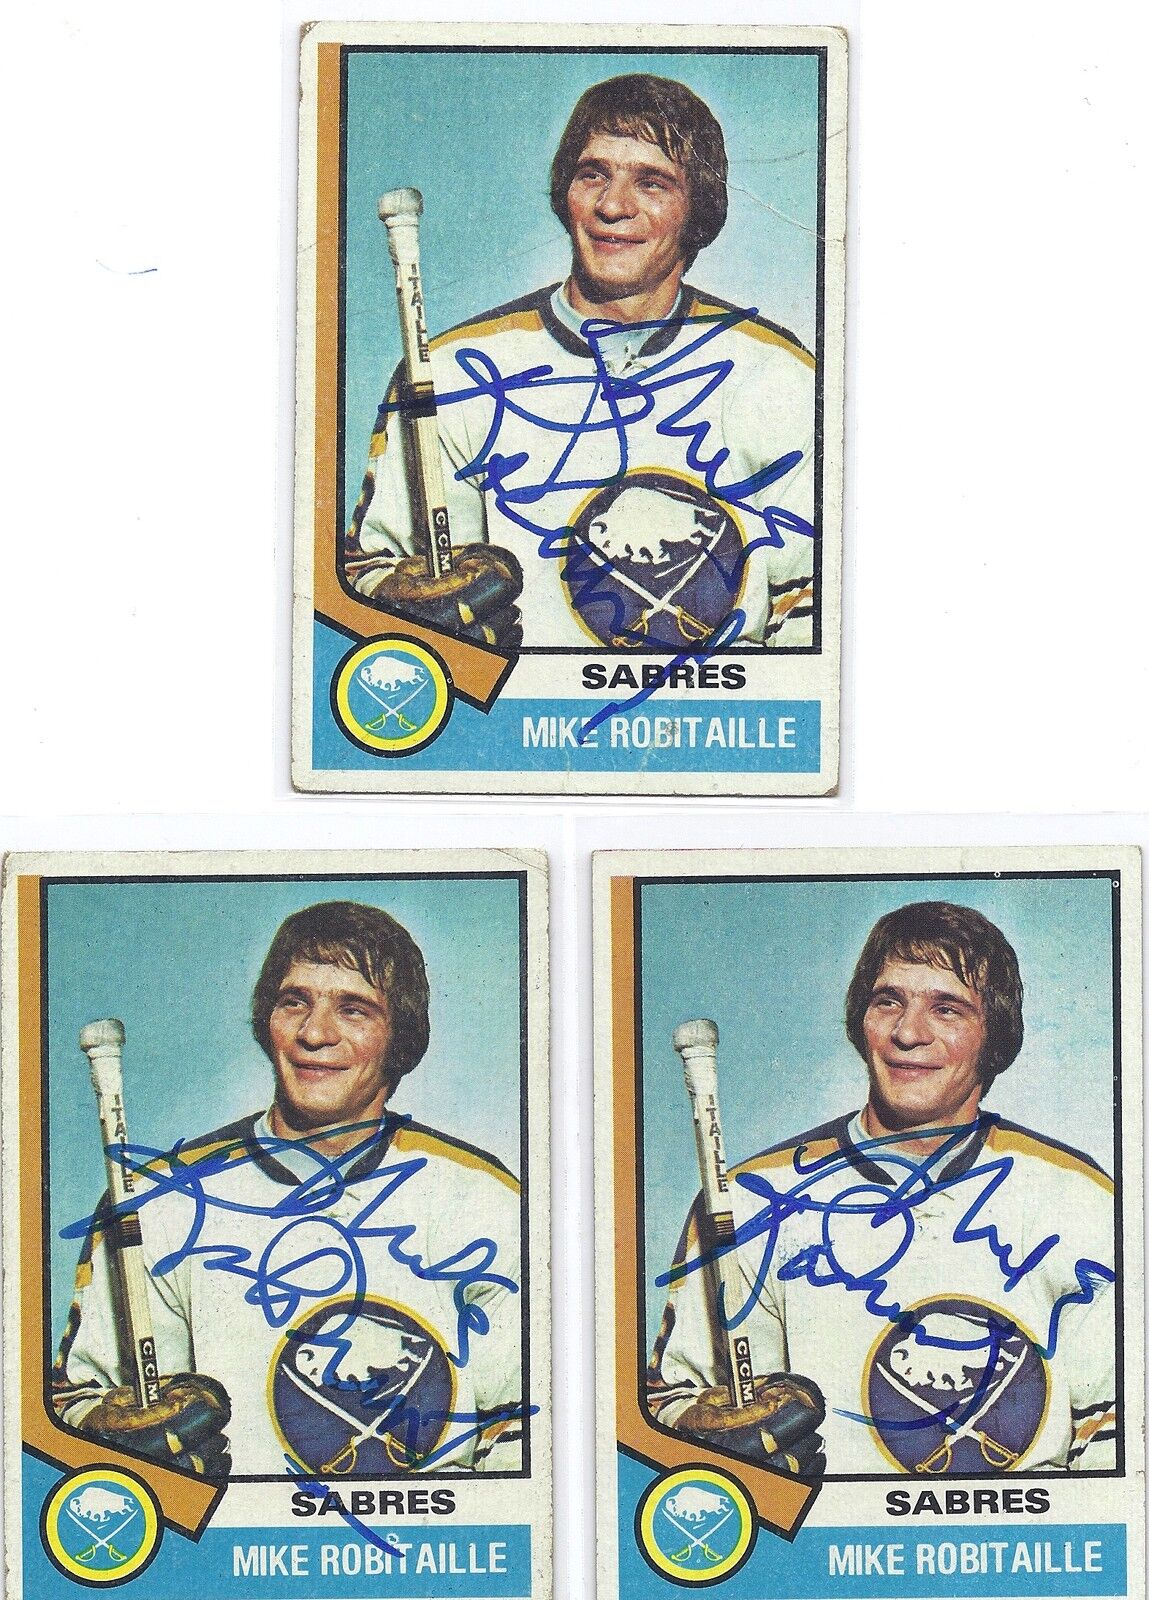 1974-75 Topps #159 Mike Robitaille Buffalo Sabres Autographed Hockey Card